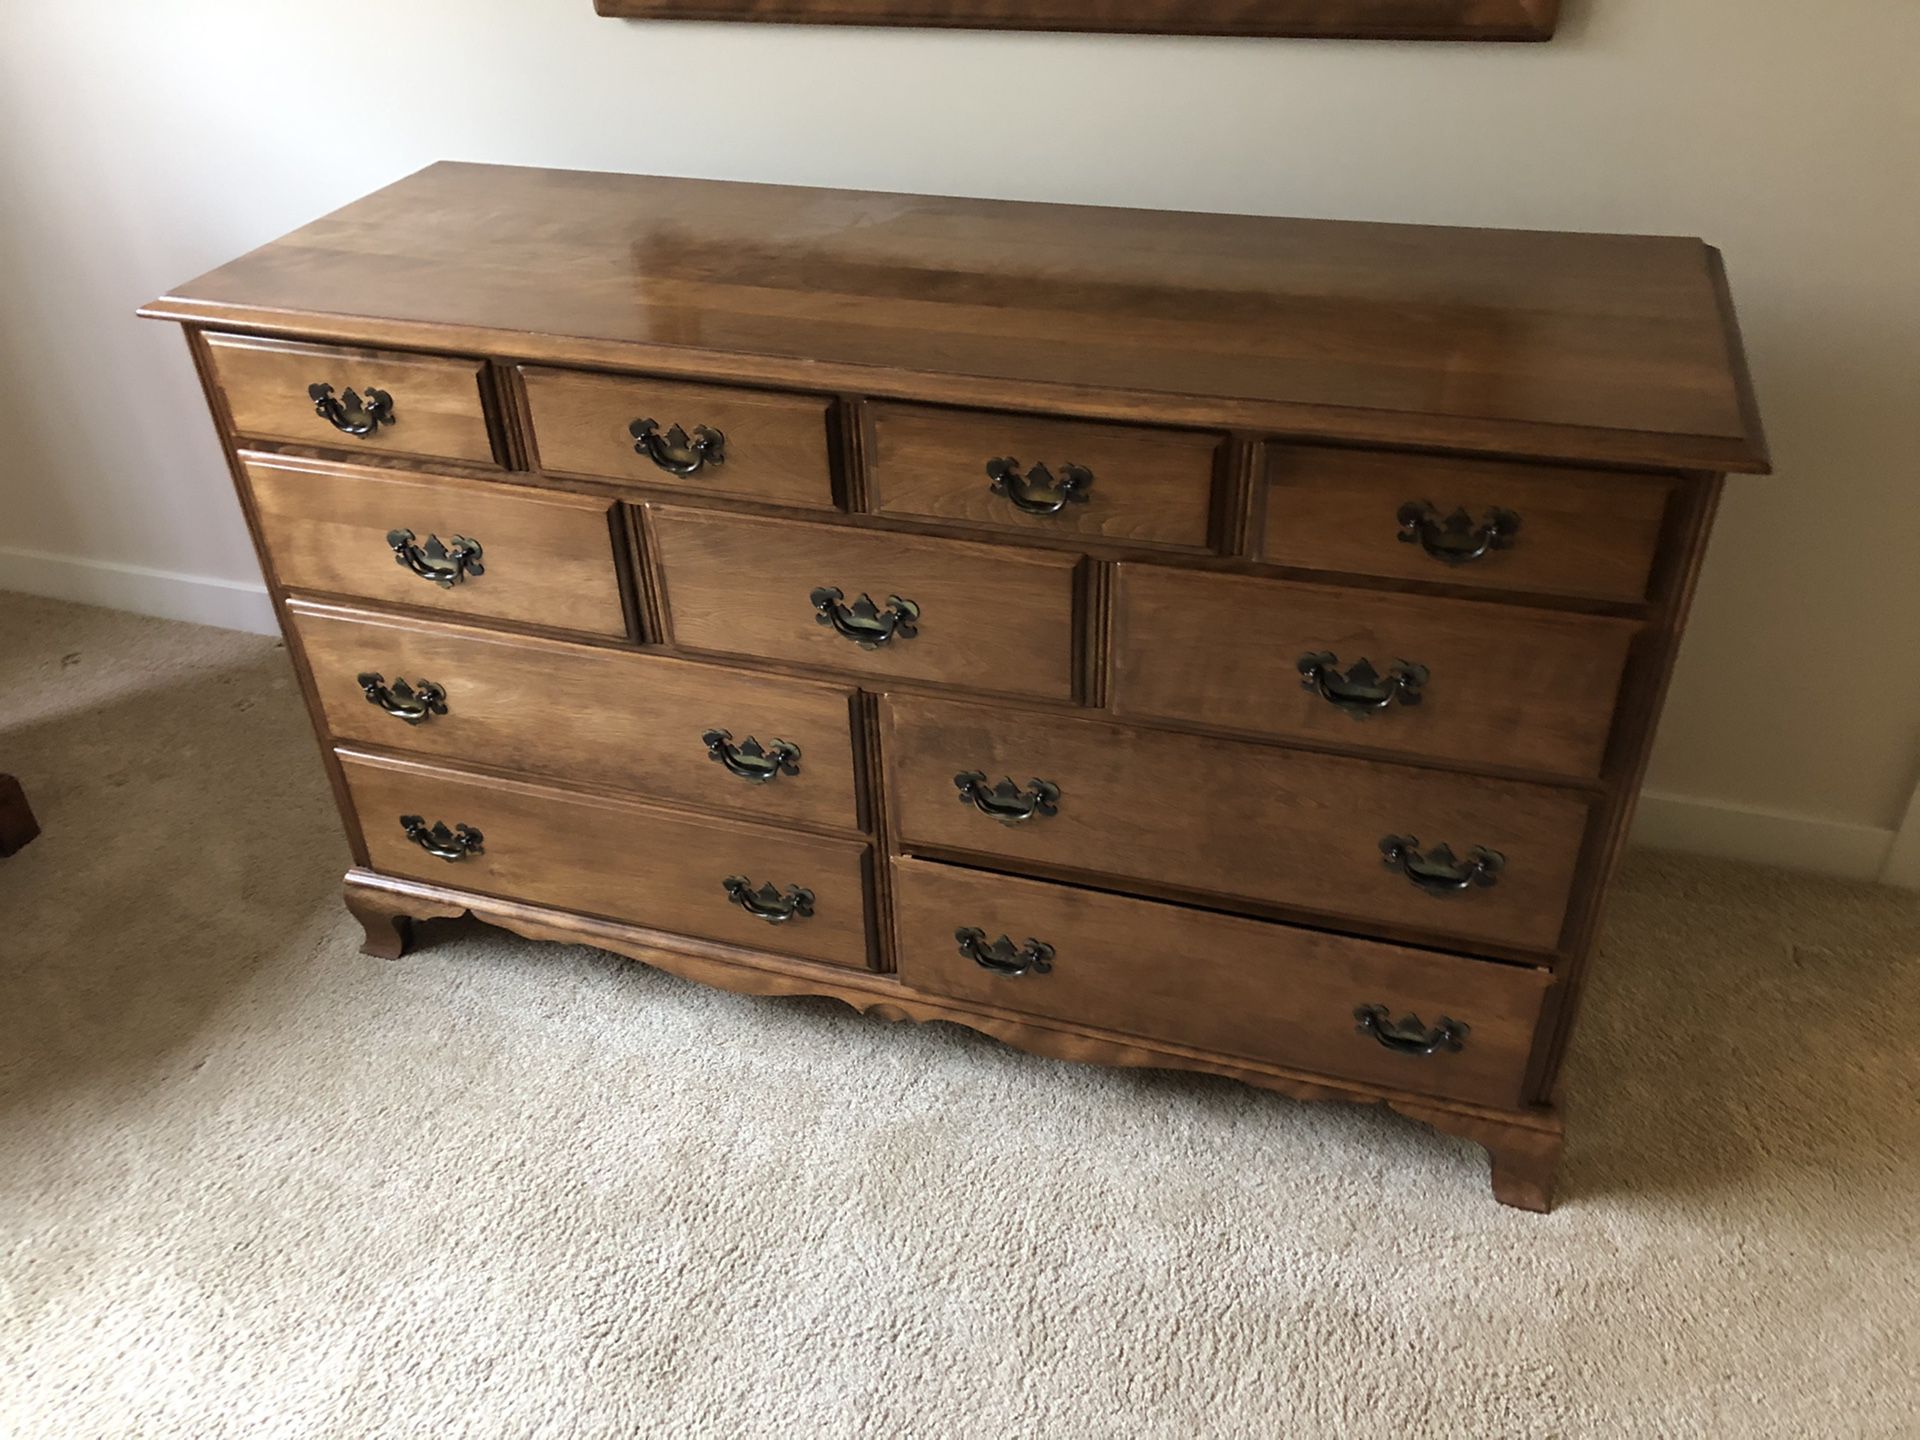 Antique dresser with end tables